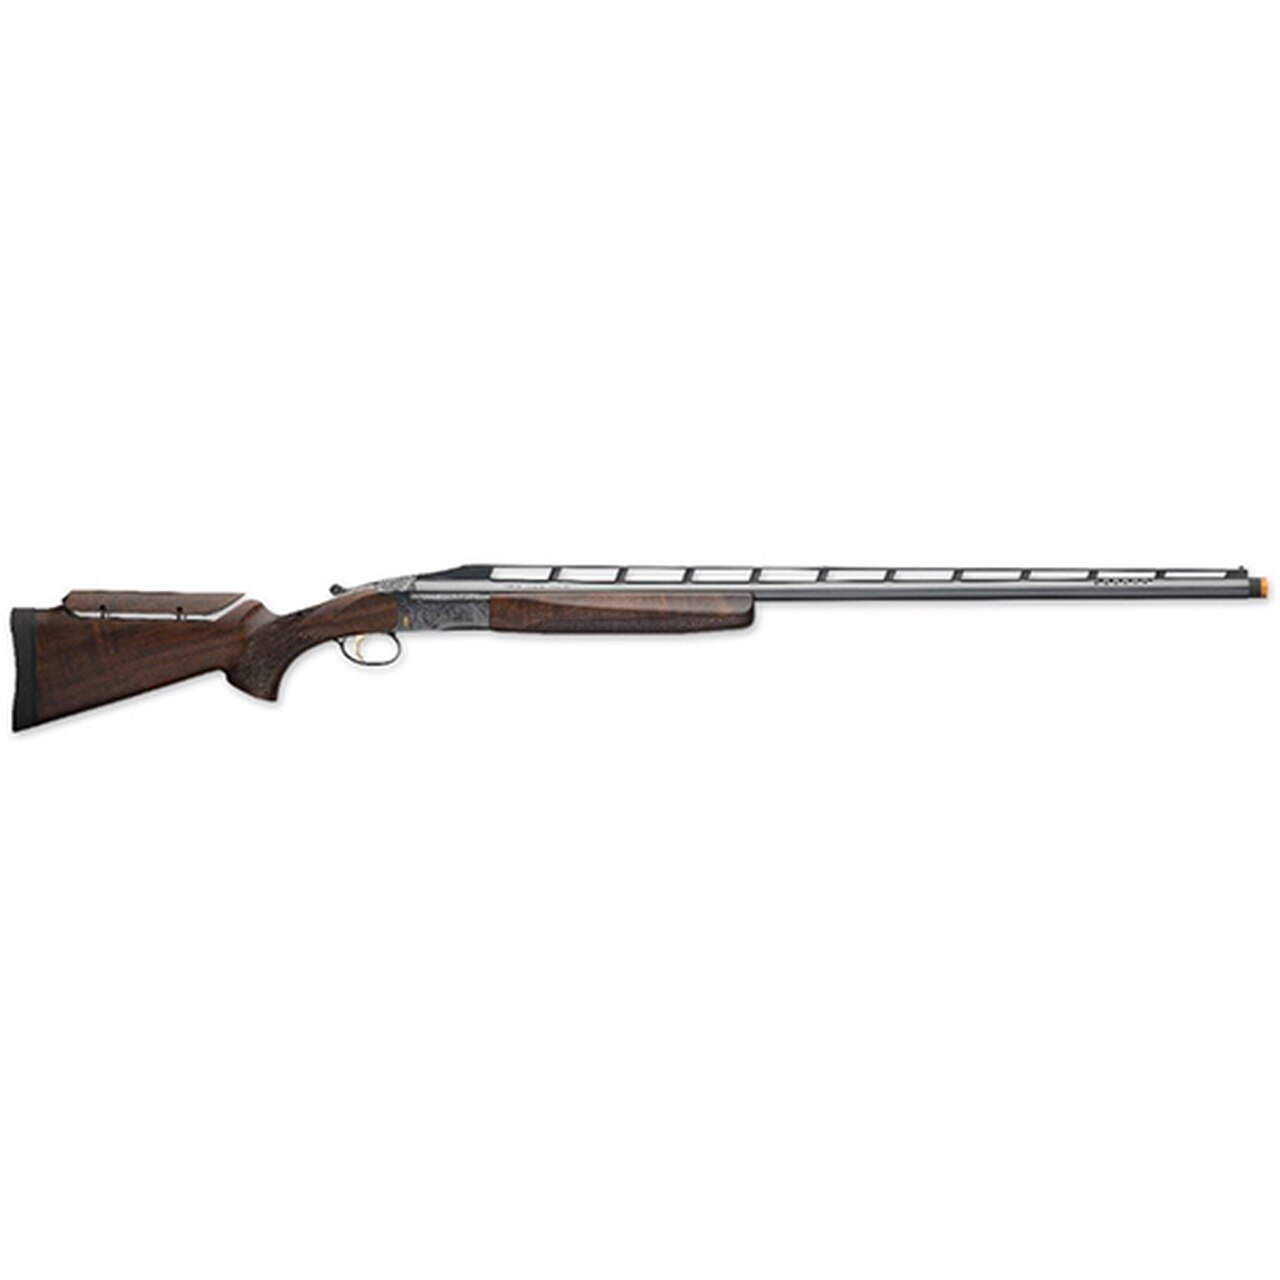 Image of Savage Arms 11 Trophy Hunter XP Compact 223 Rem 4 Round Bolt Action Centerfire Rifle, Sporter - 19743